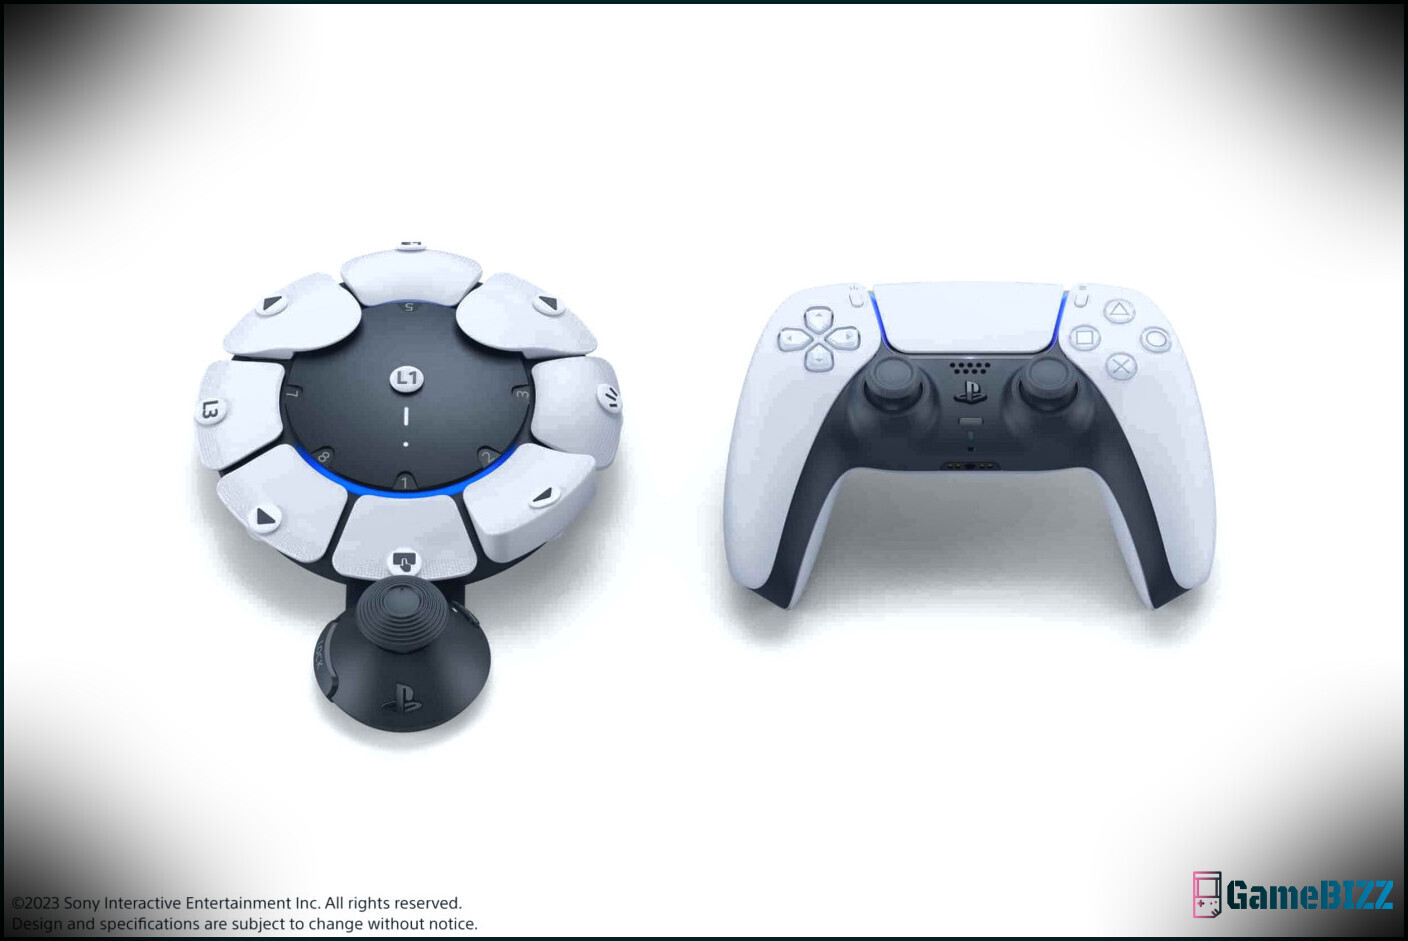 PlayStation's Accessibility Controller wird offiziell Access genannt